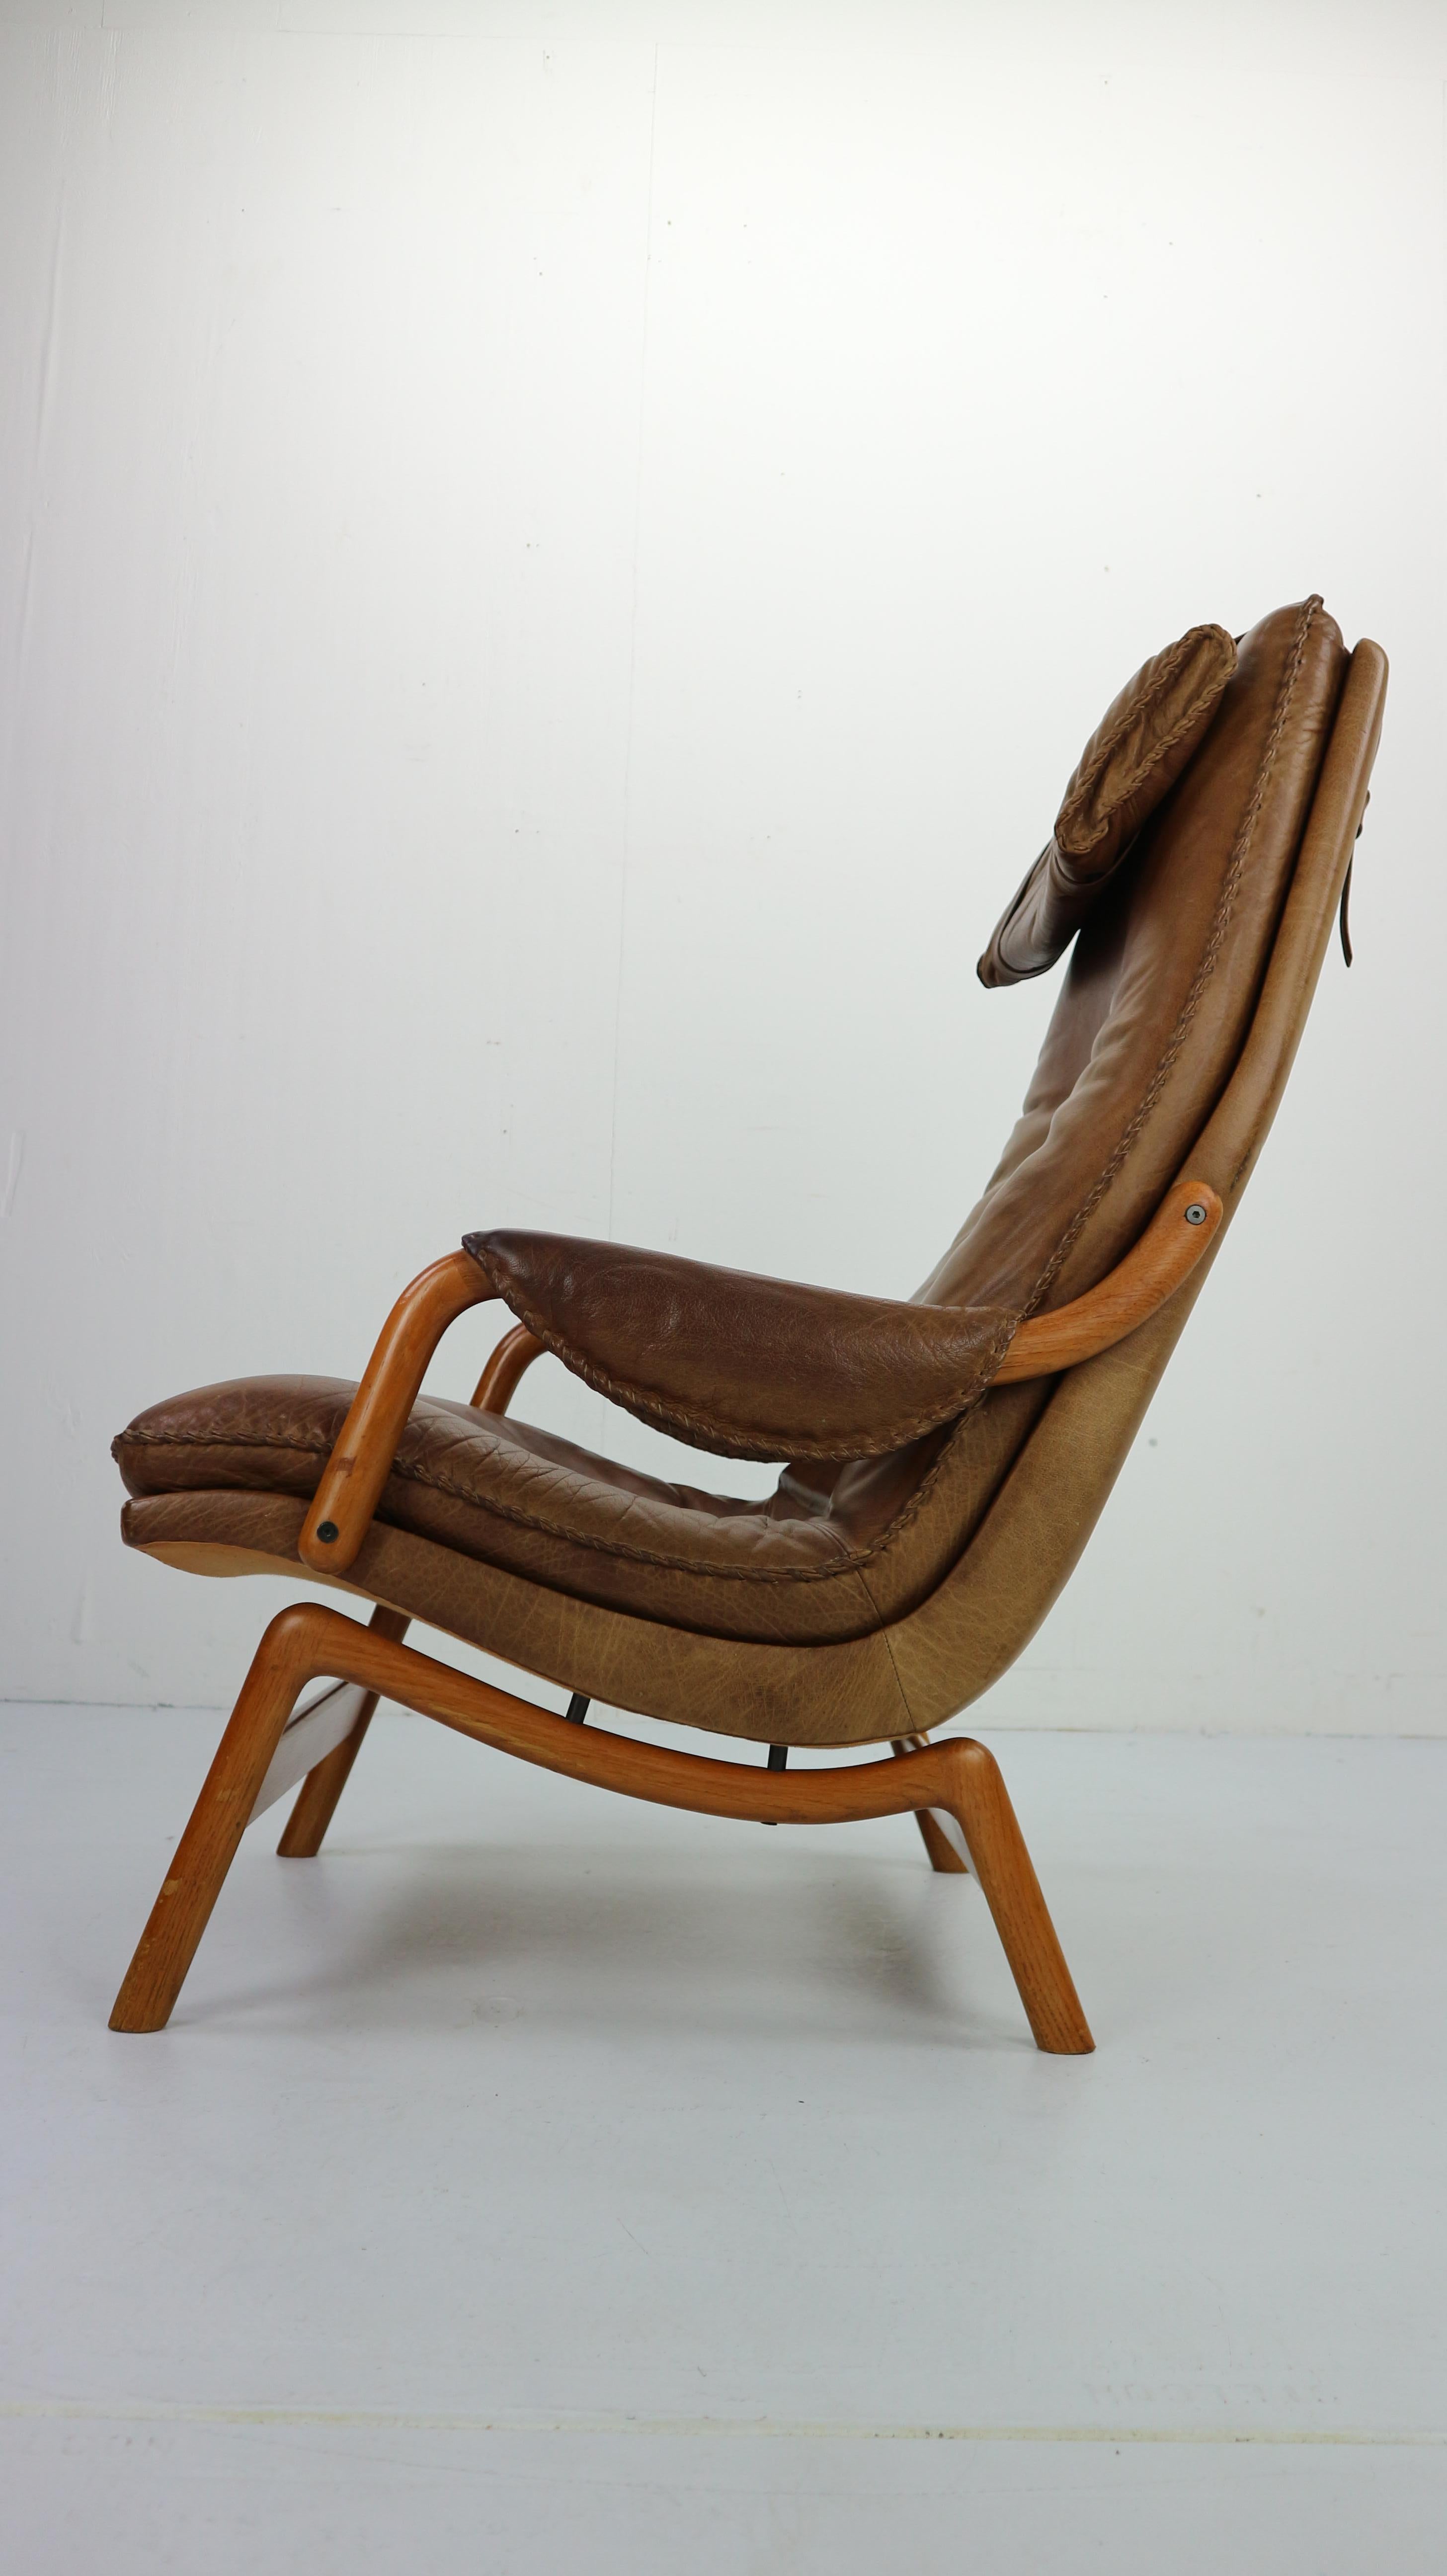 Mid-20th Century Scandinavian Midcentury Design Brown Leather Lounge Chair, 1960s